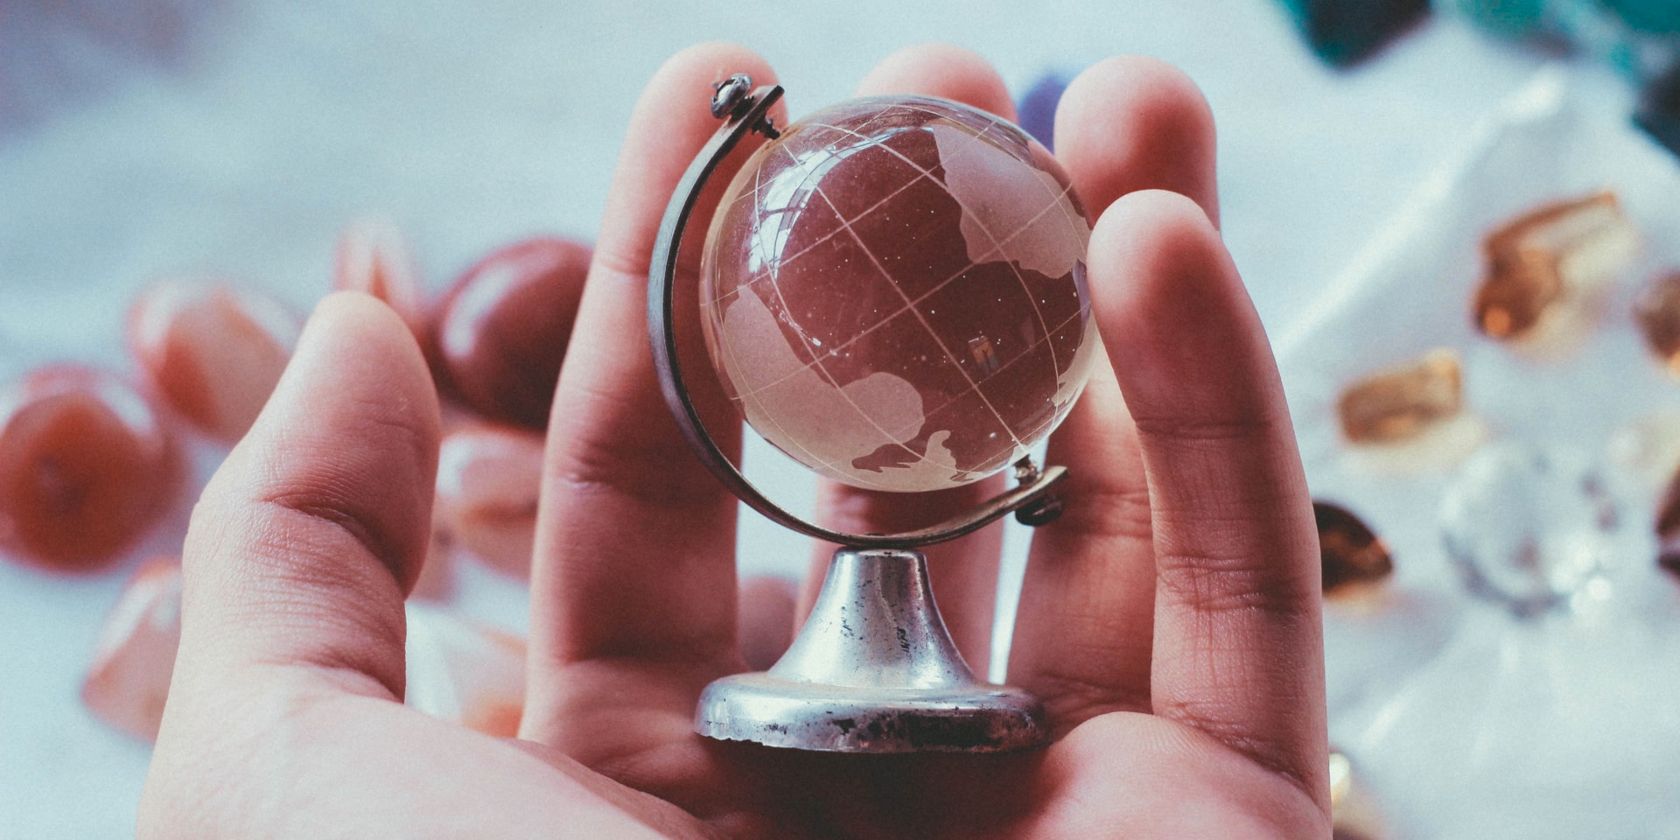 Small Crystal Globe in Hand